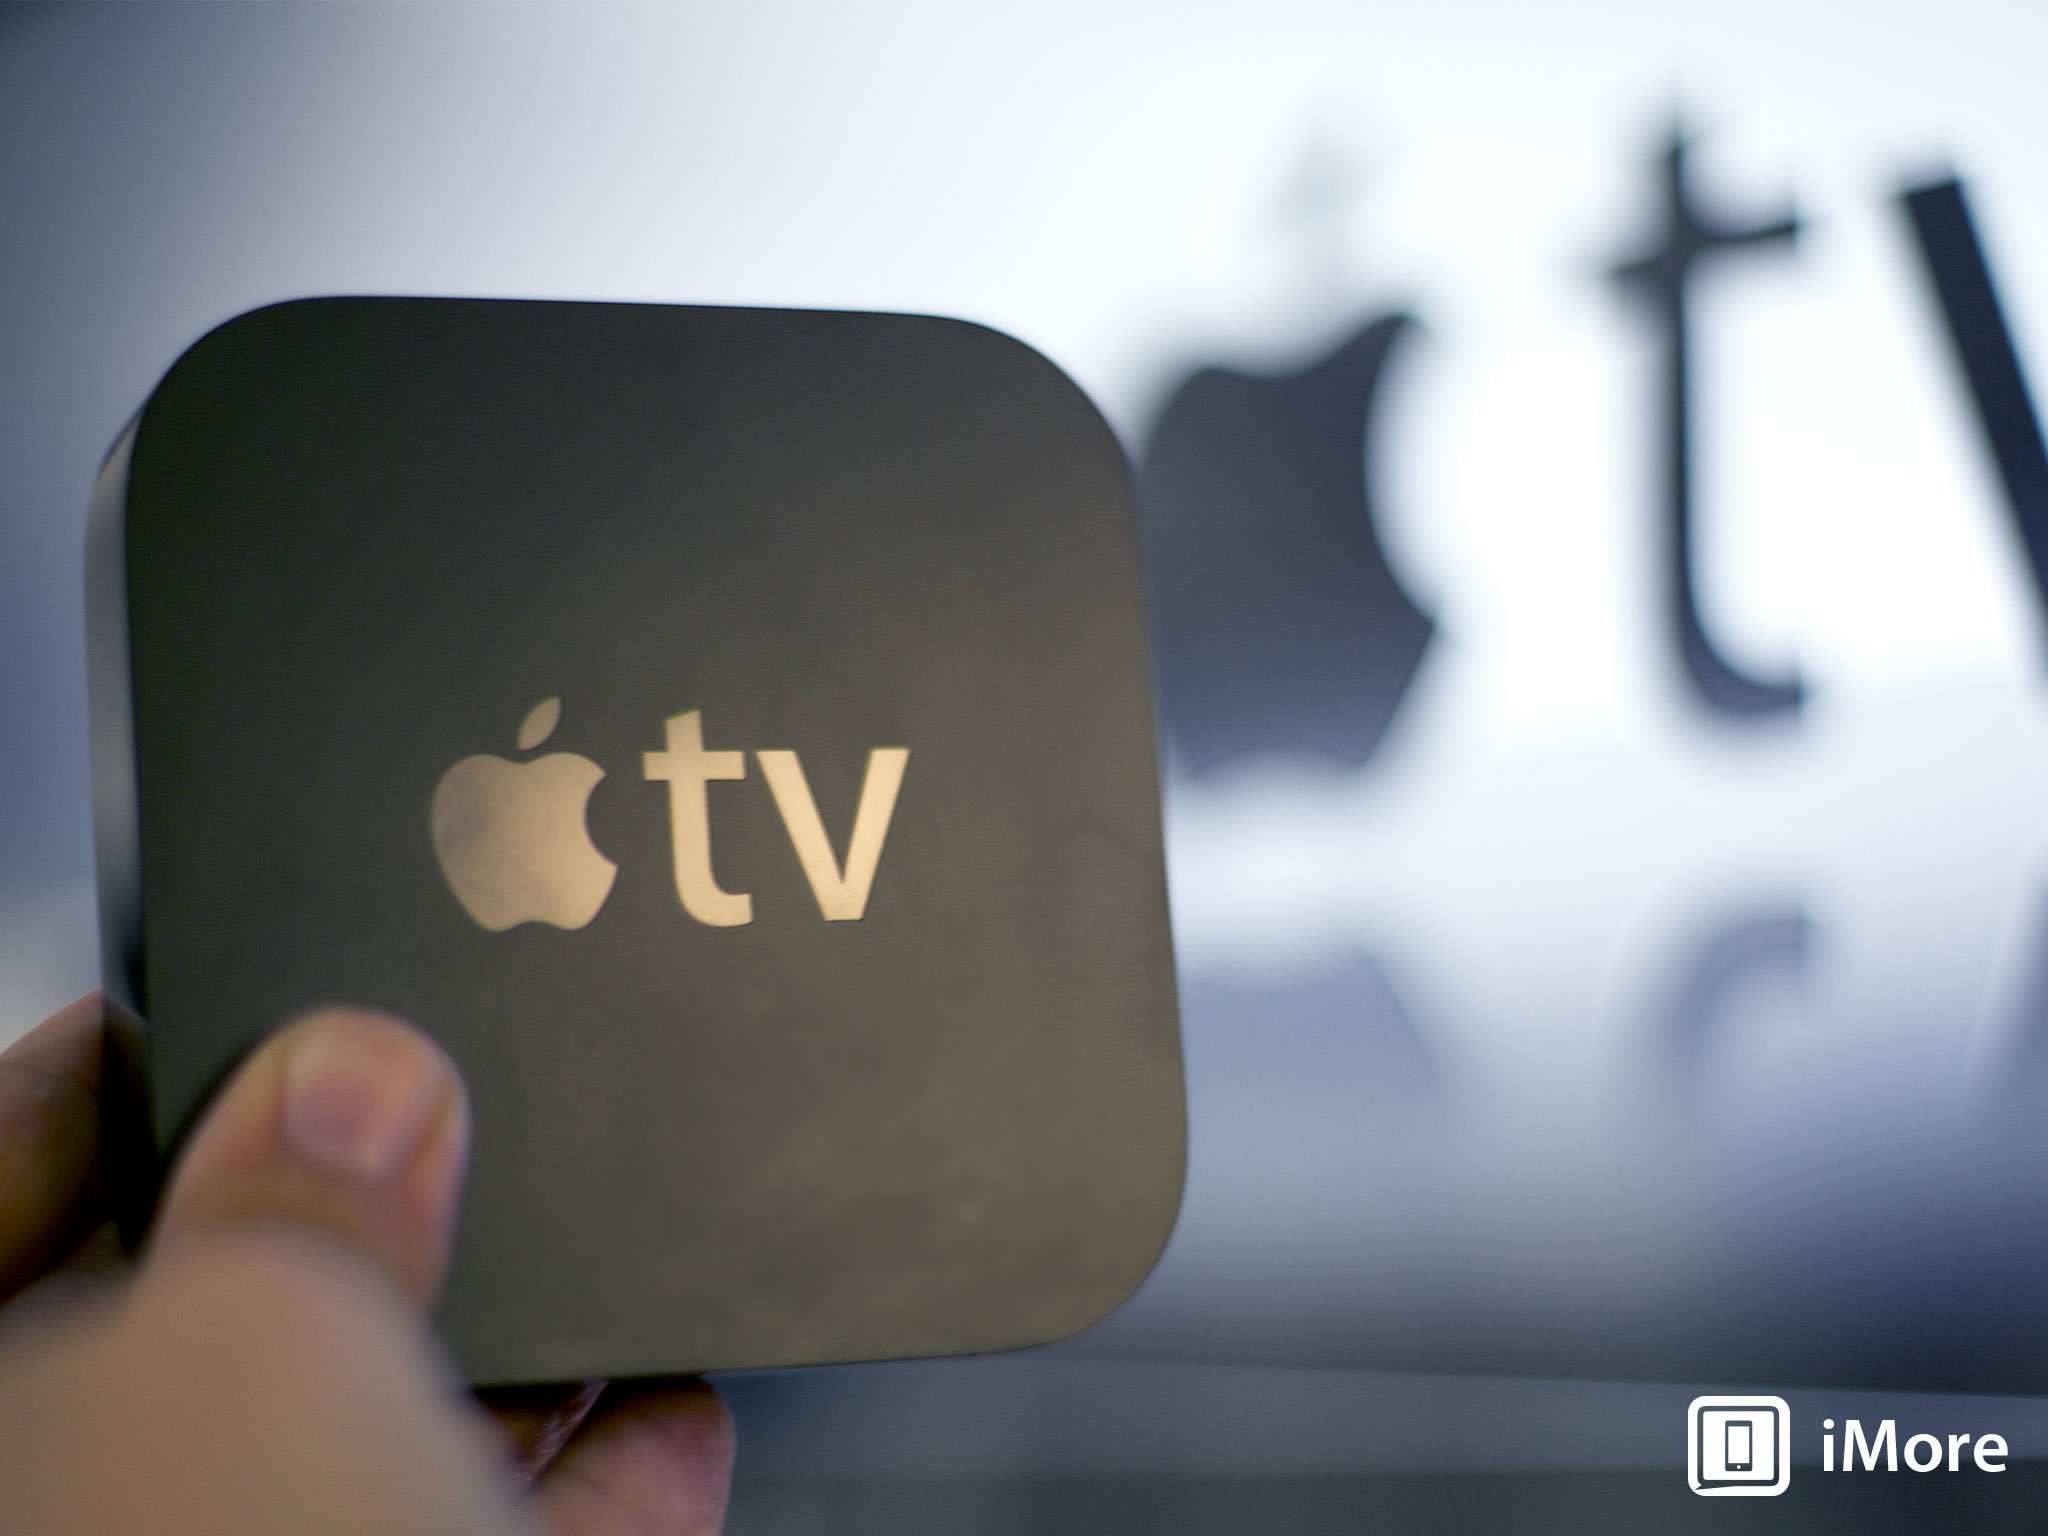 Apple said to be negotiating with content providers for possible TV delivery service